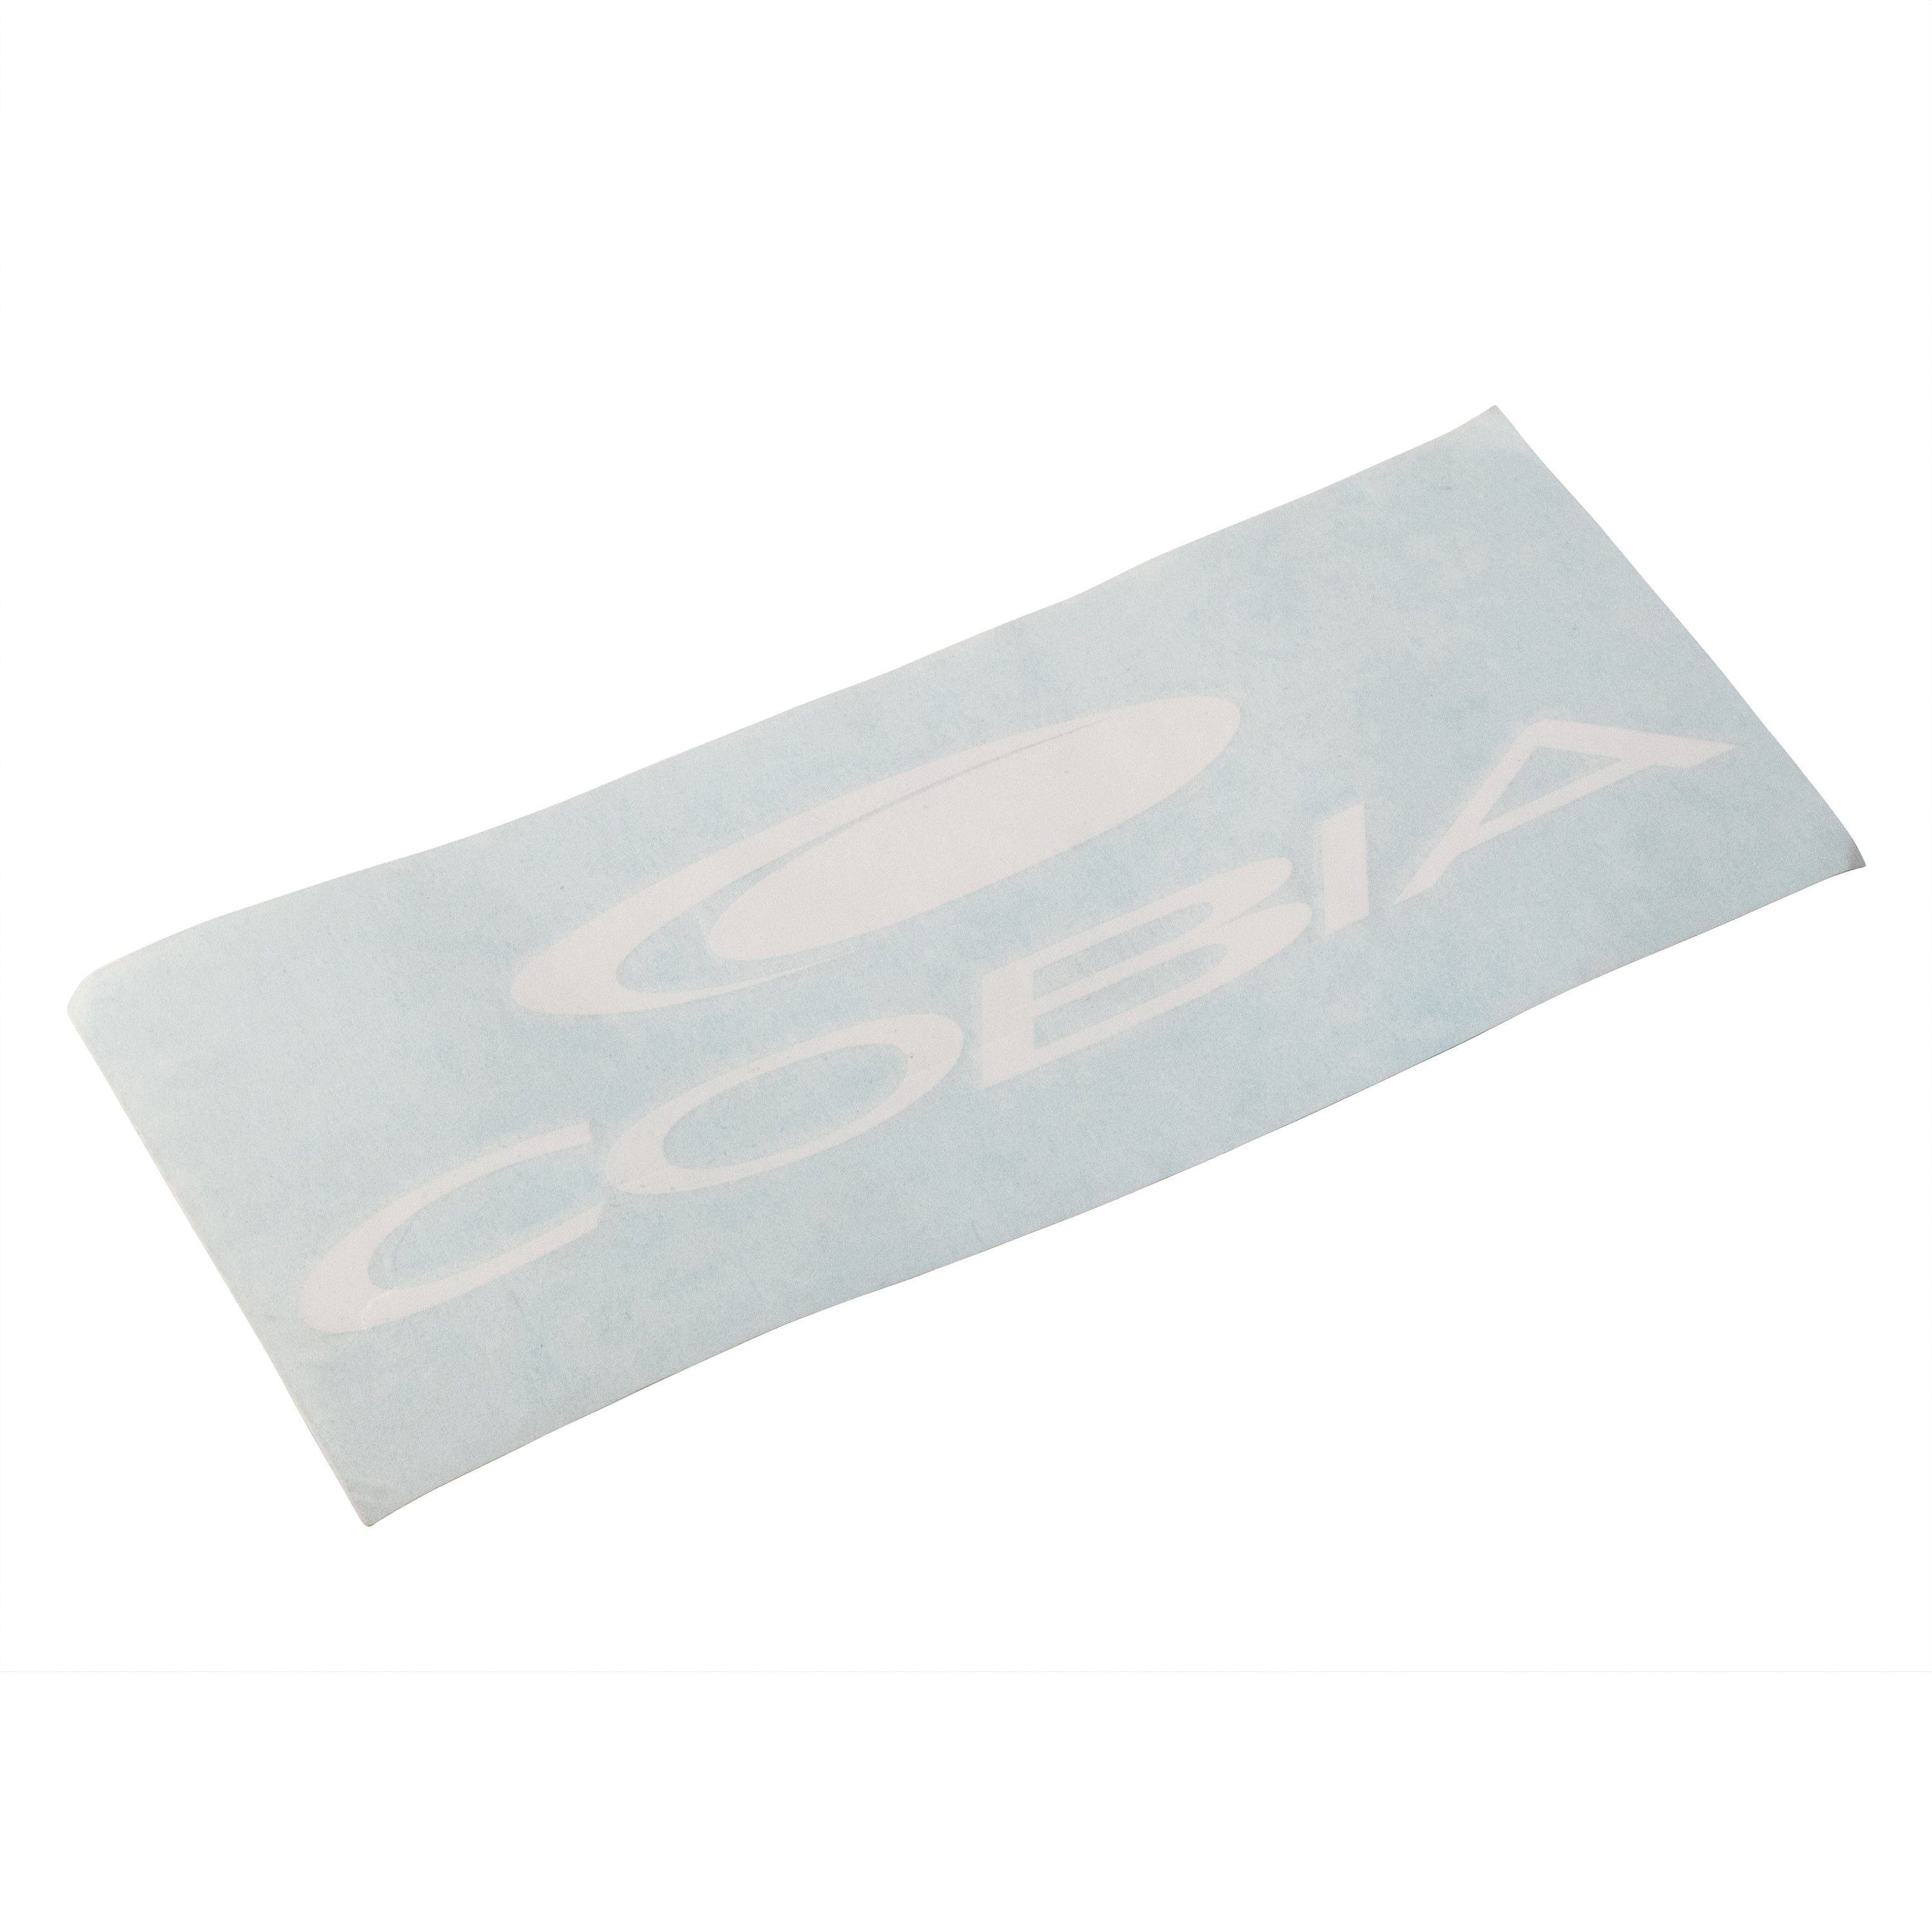 Cobia decal with premask